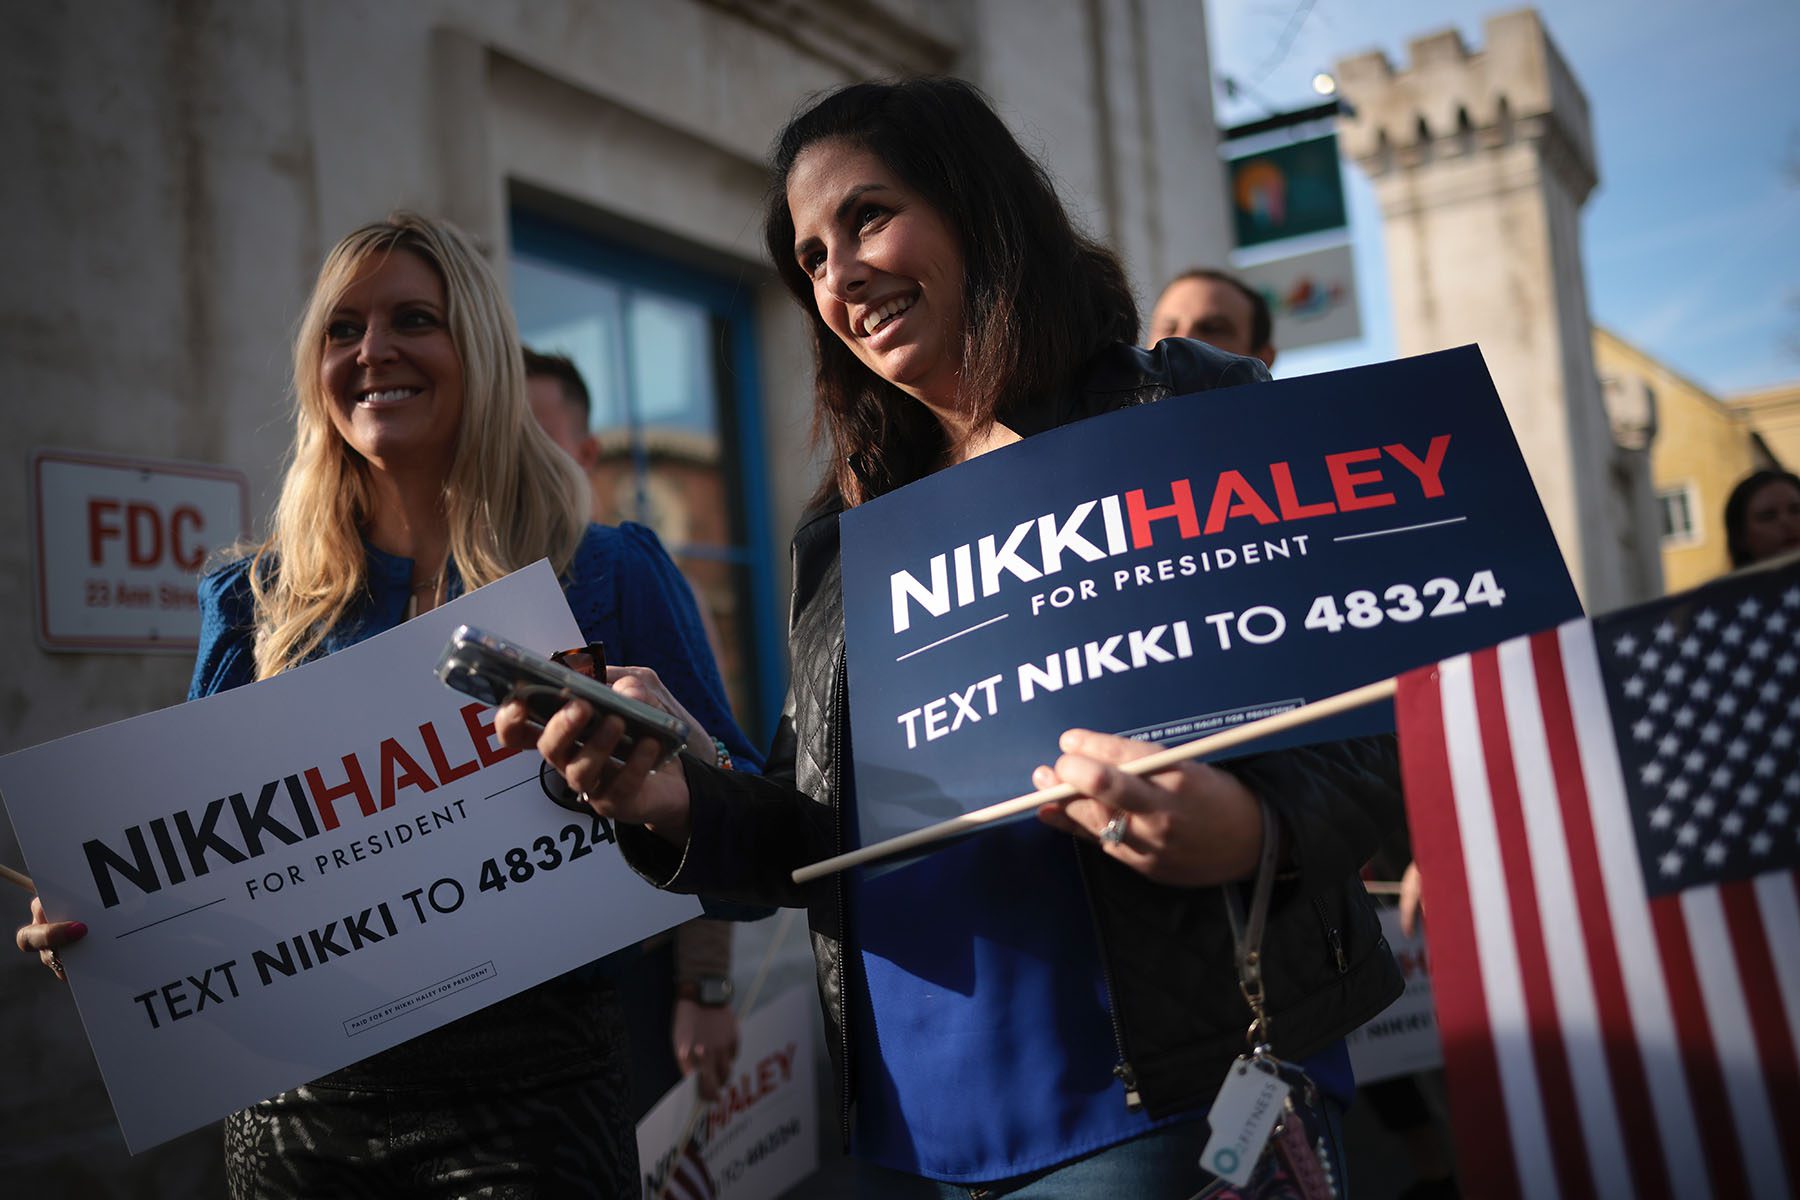 Supporters holding "Nikki Haley For President" signs wait in line before her first campaign event.